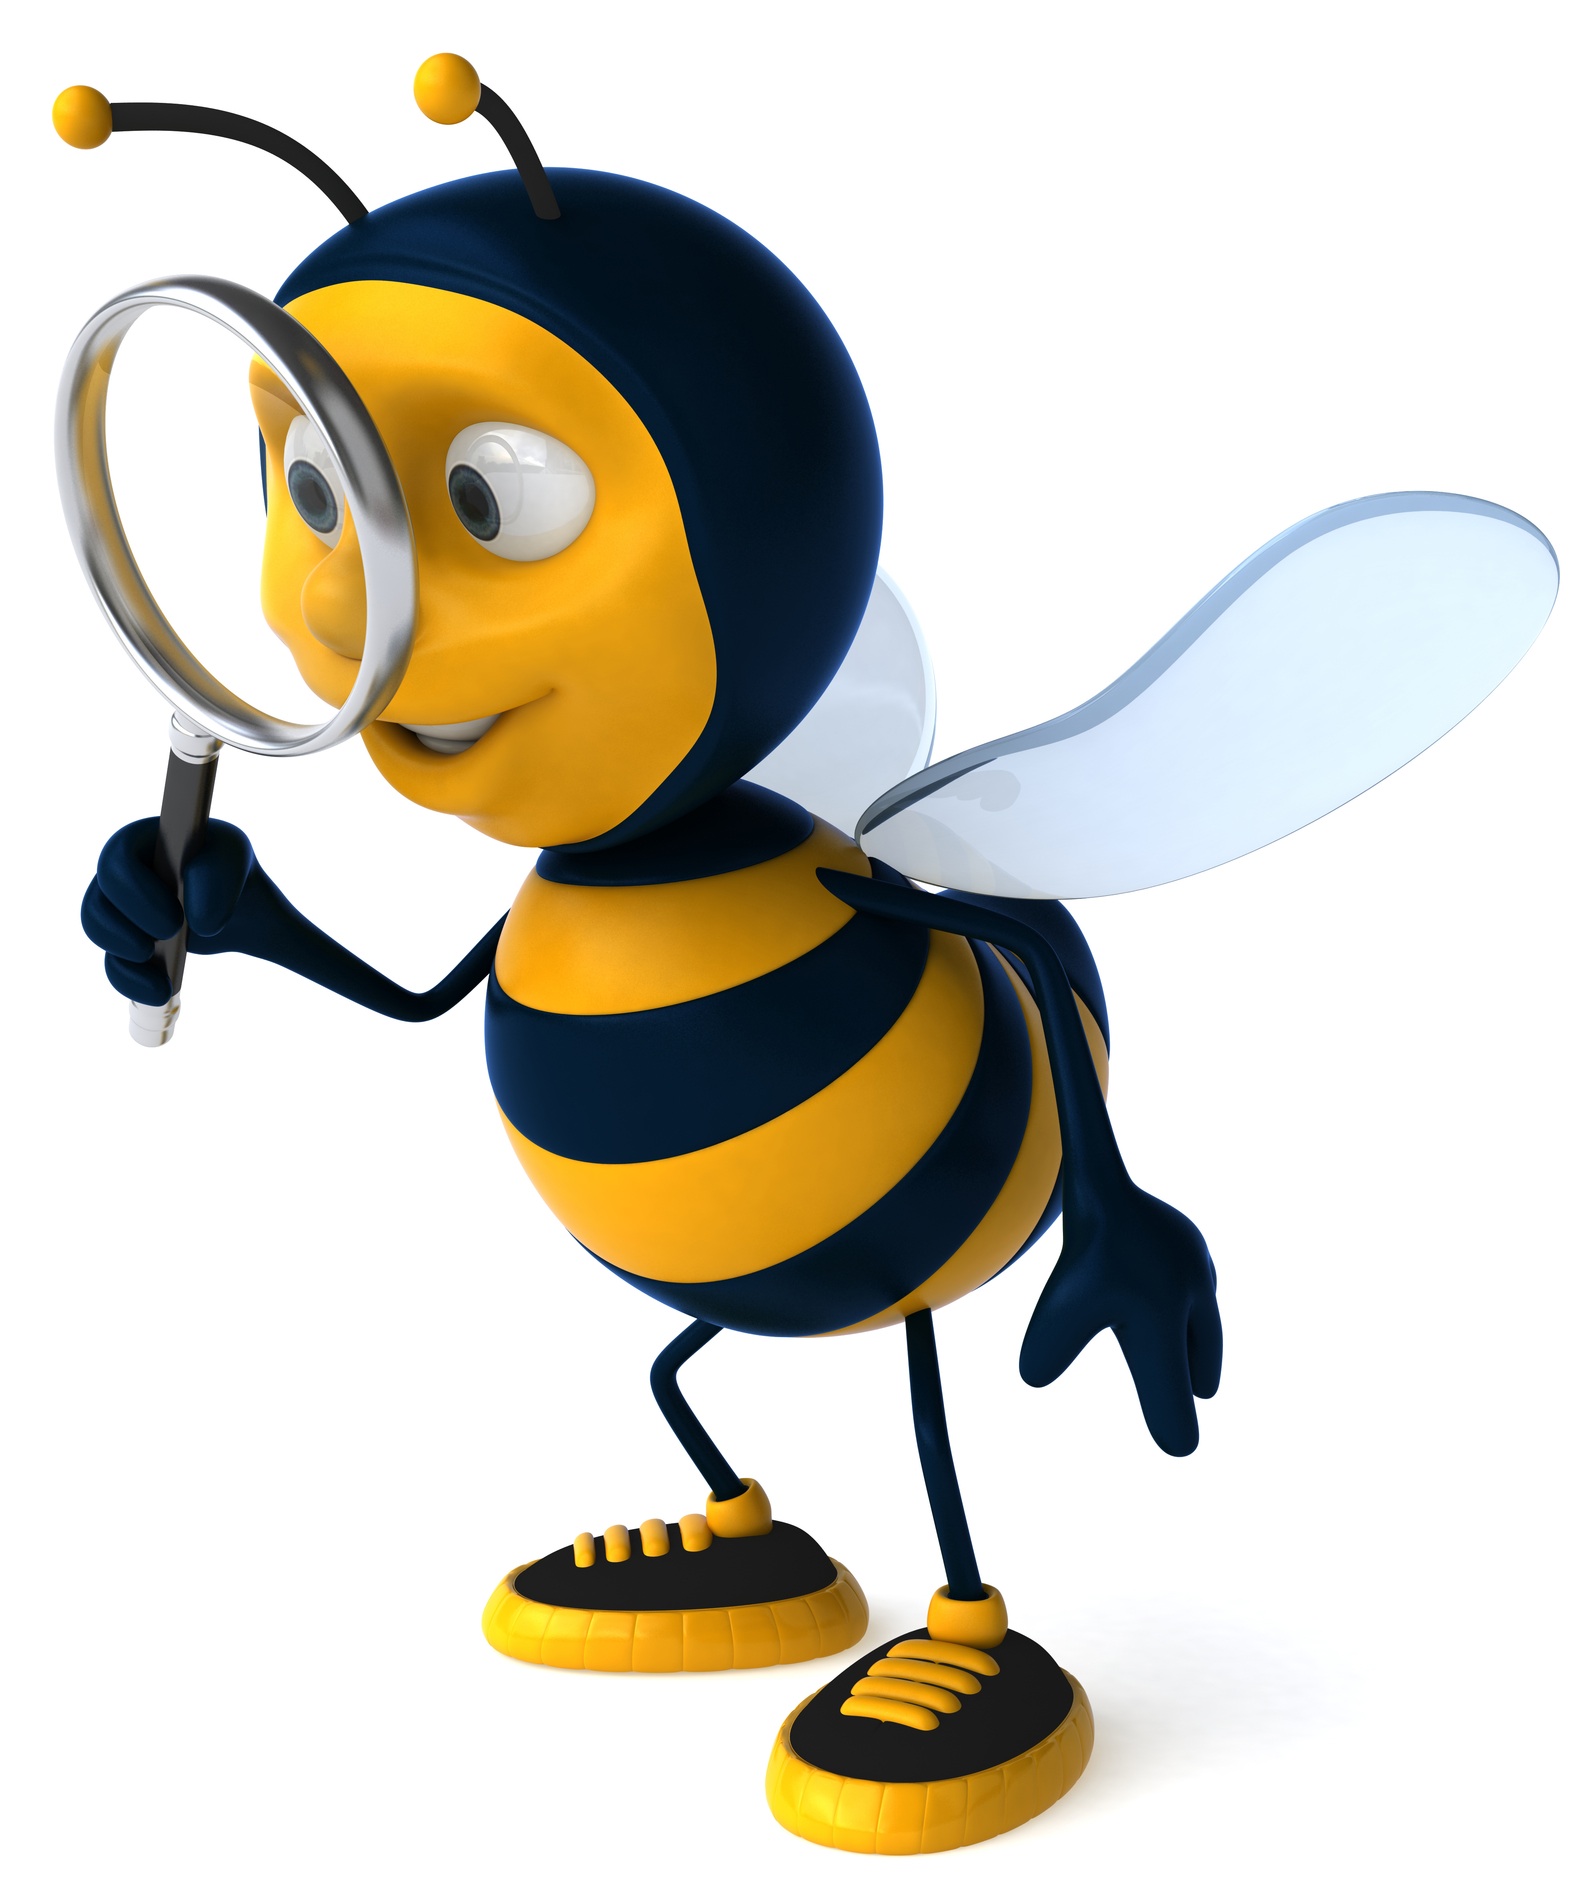 Cartoon Bumble Bee Images - Clipart library